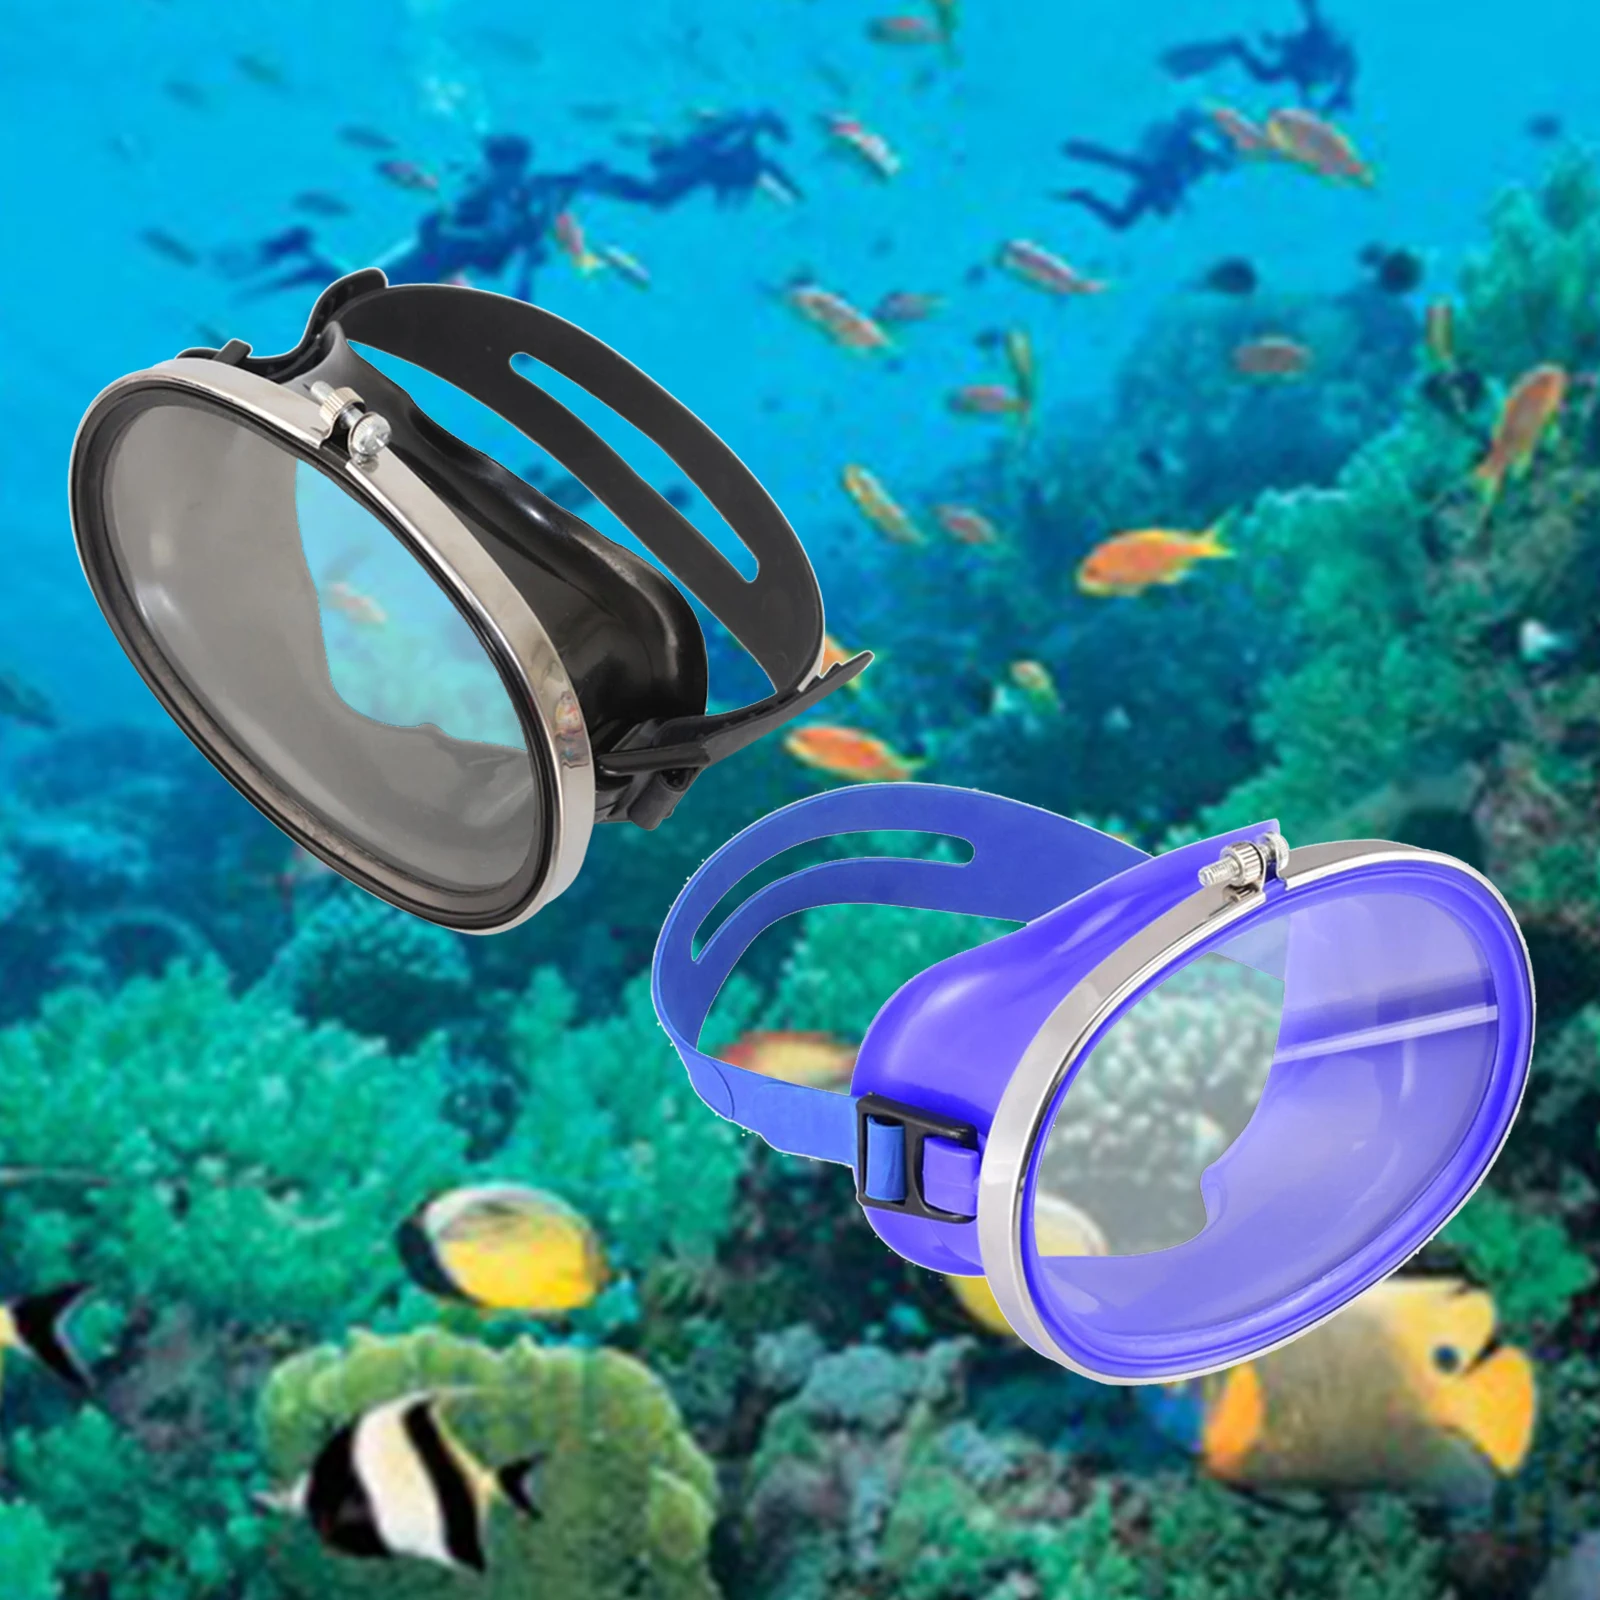 Classic Oval Diving Mask Scuba Diving & Spearfishing Anti-Fog Single Lens Goggles Glasses with Silicone Strap for Adult